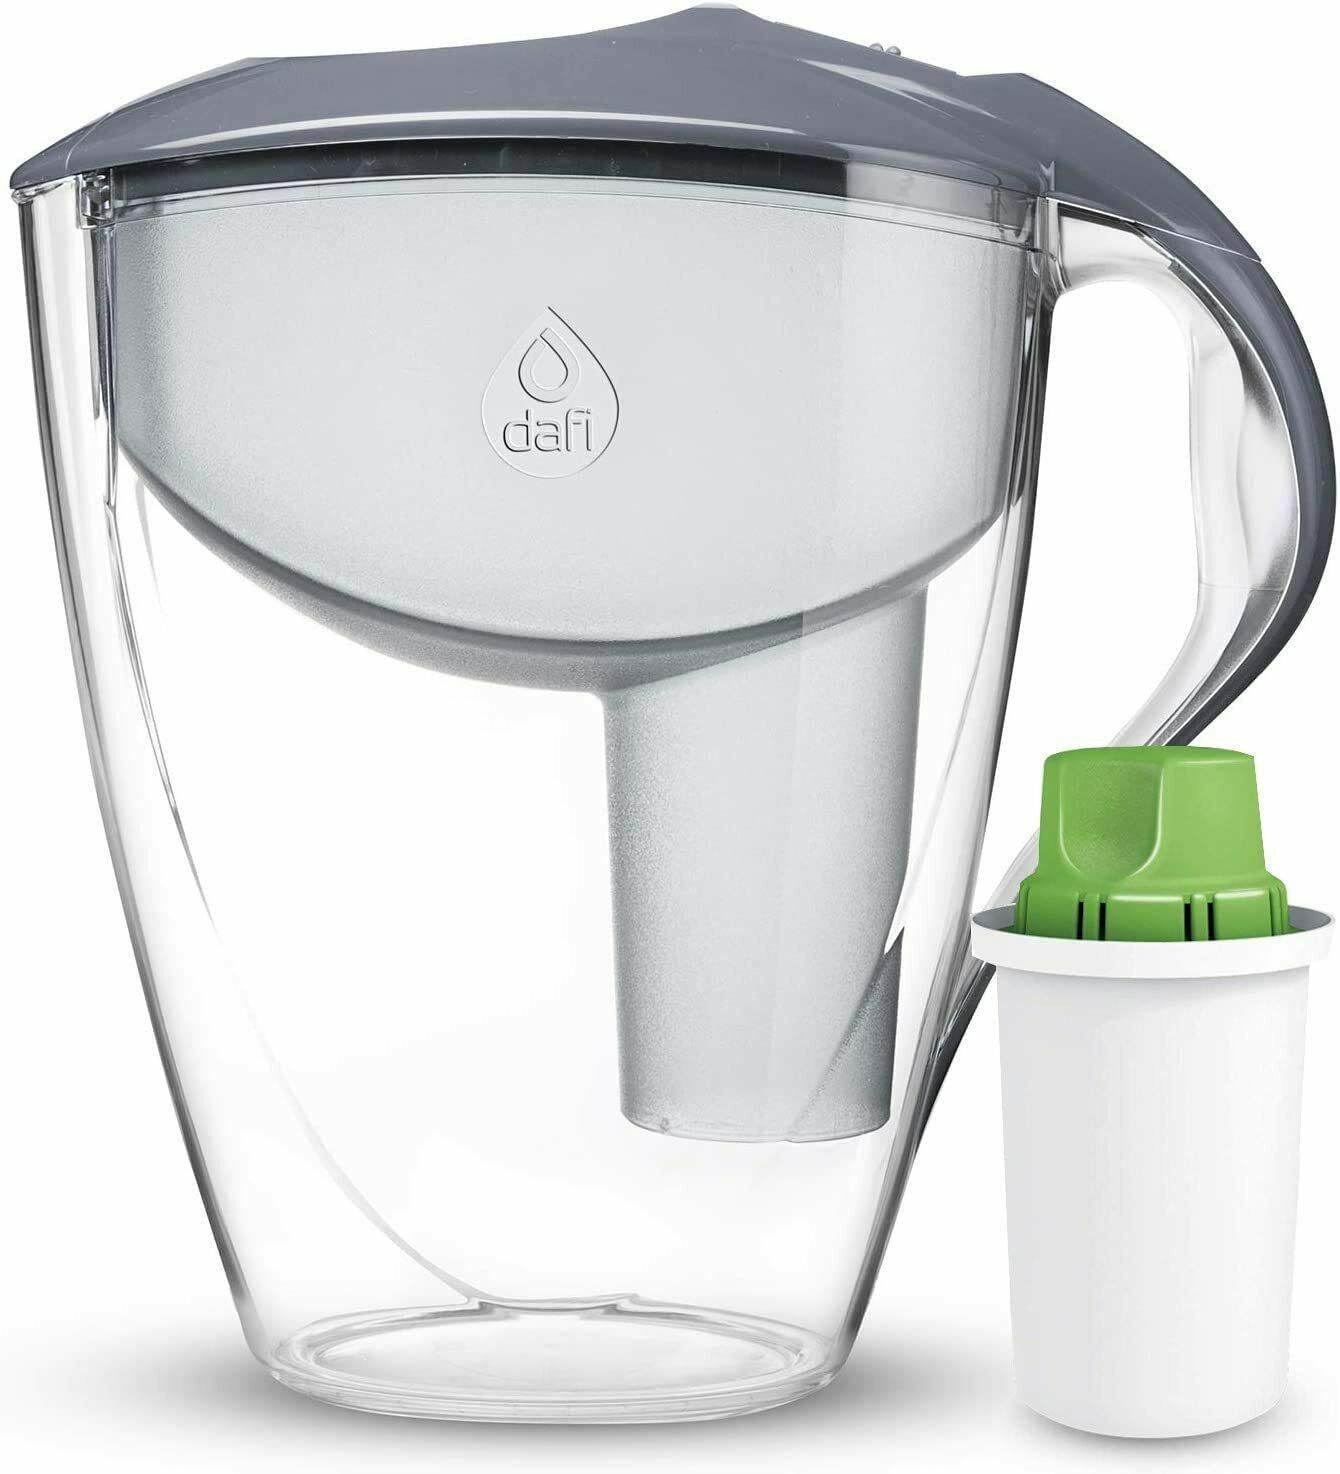 Dafi Astra LED Filtering Water Pitcher Gray 12 Cups + Alkaline Filter BPA-Free